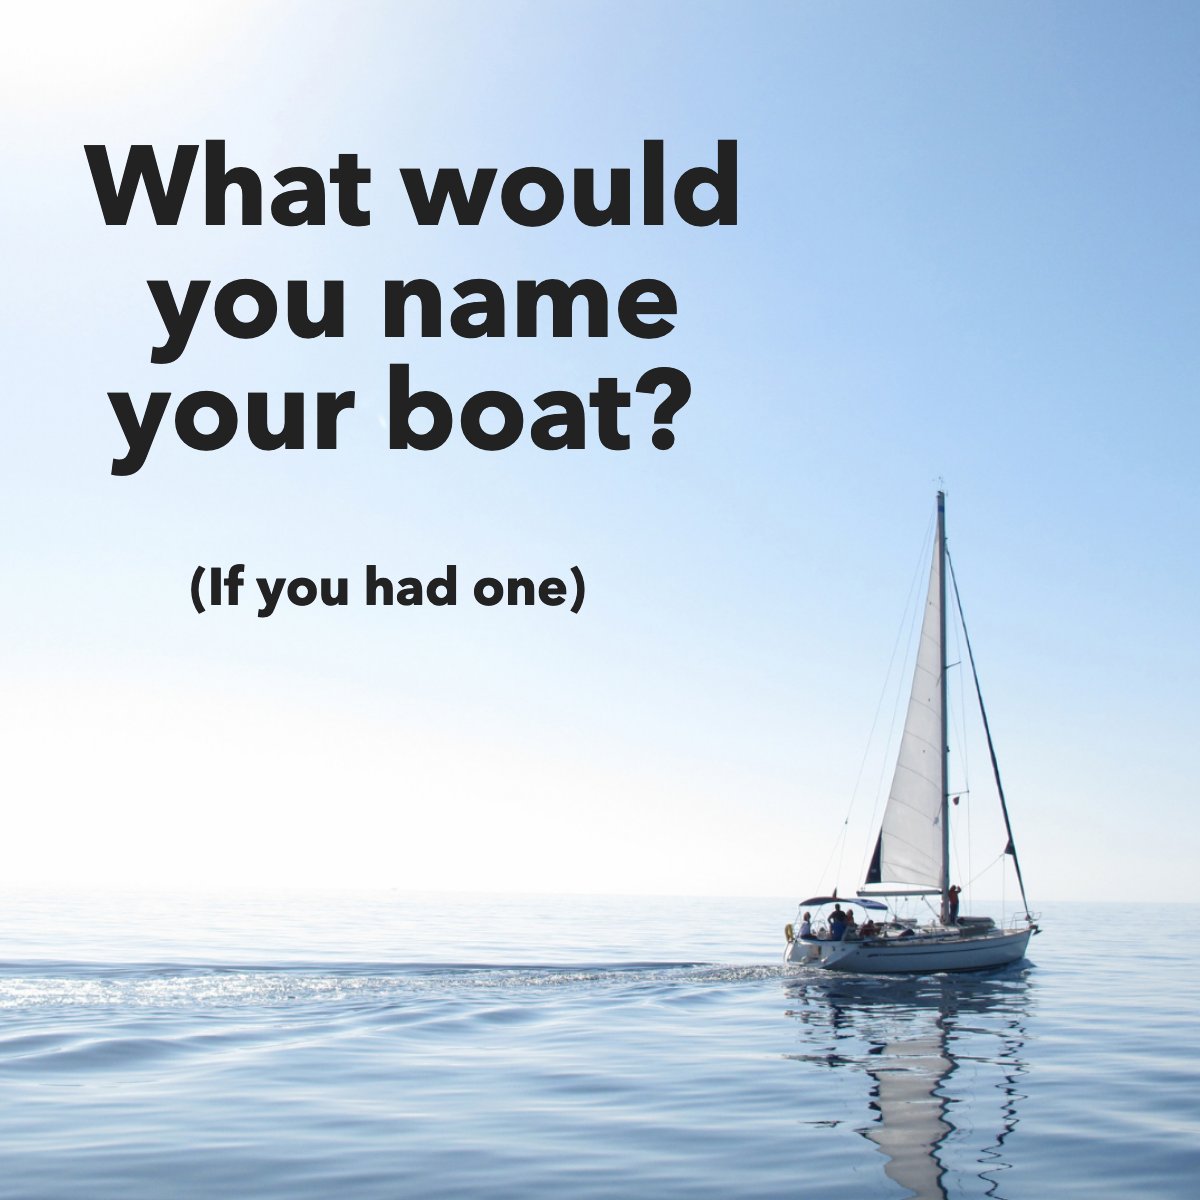 Naming boats after famous songs, movies, or other cultural arts you love is acceptable and entertaining. 😆😉

#boatrip #boatinglife #boats #ocean #searayboats #boatfishing
 #callniecie